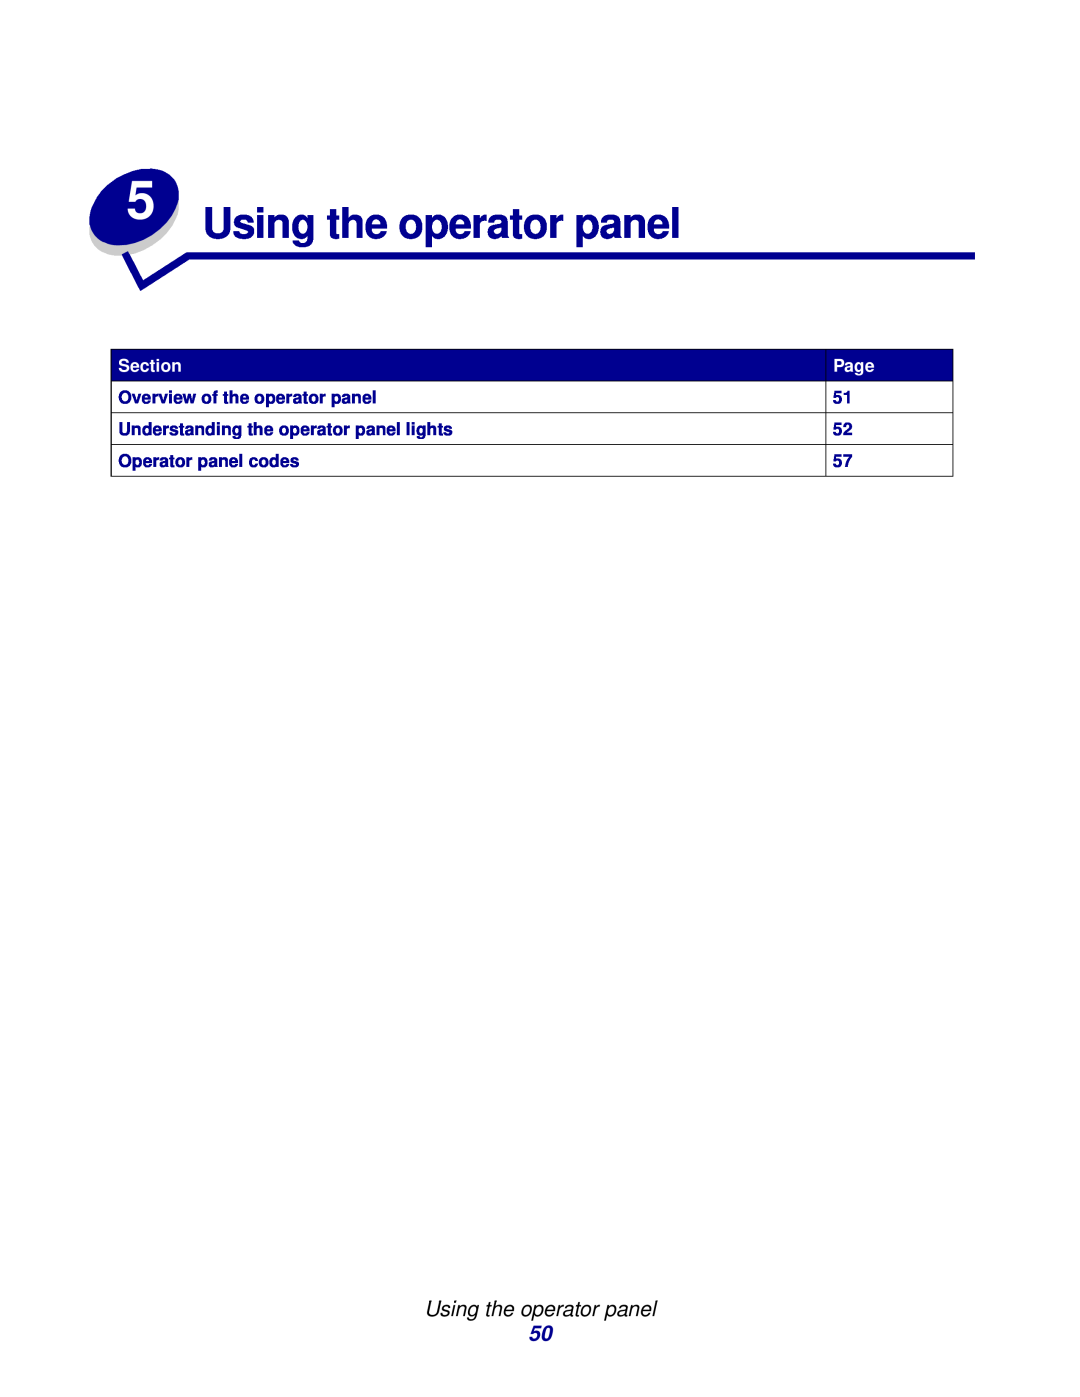 Lexmark 230, 232, E332n manual Using the operator panel, Section, Overview of the operator panel, Page 